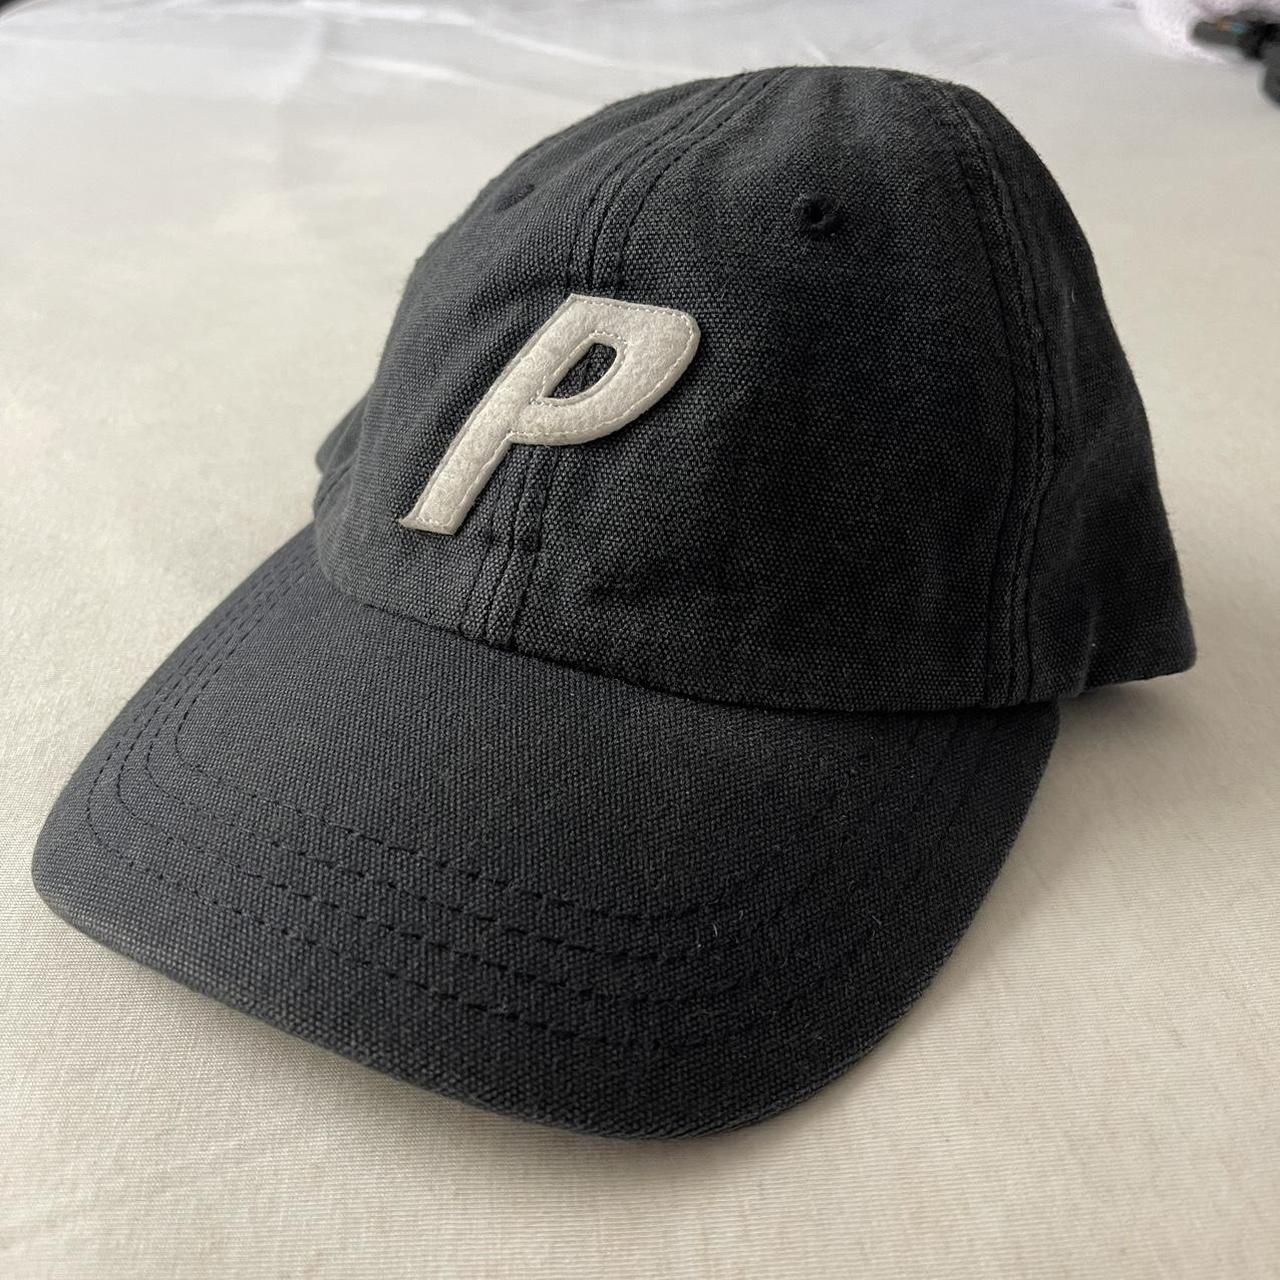 PALACE 6 panel P cap. Great condition as shown.... - Depop